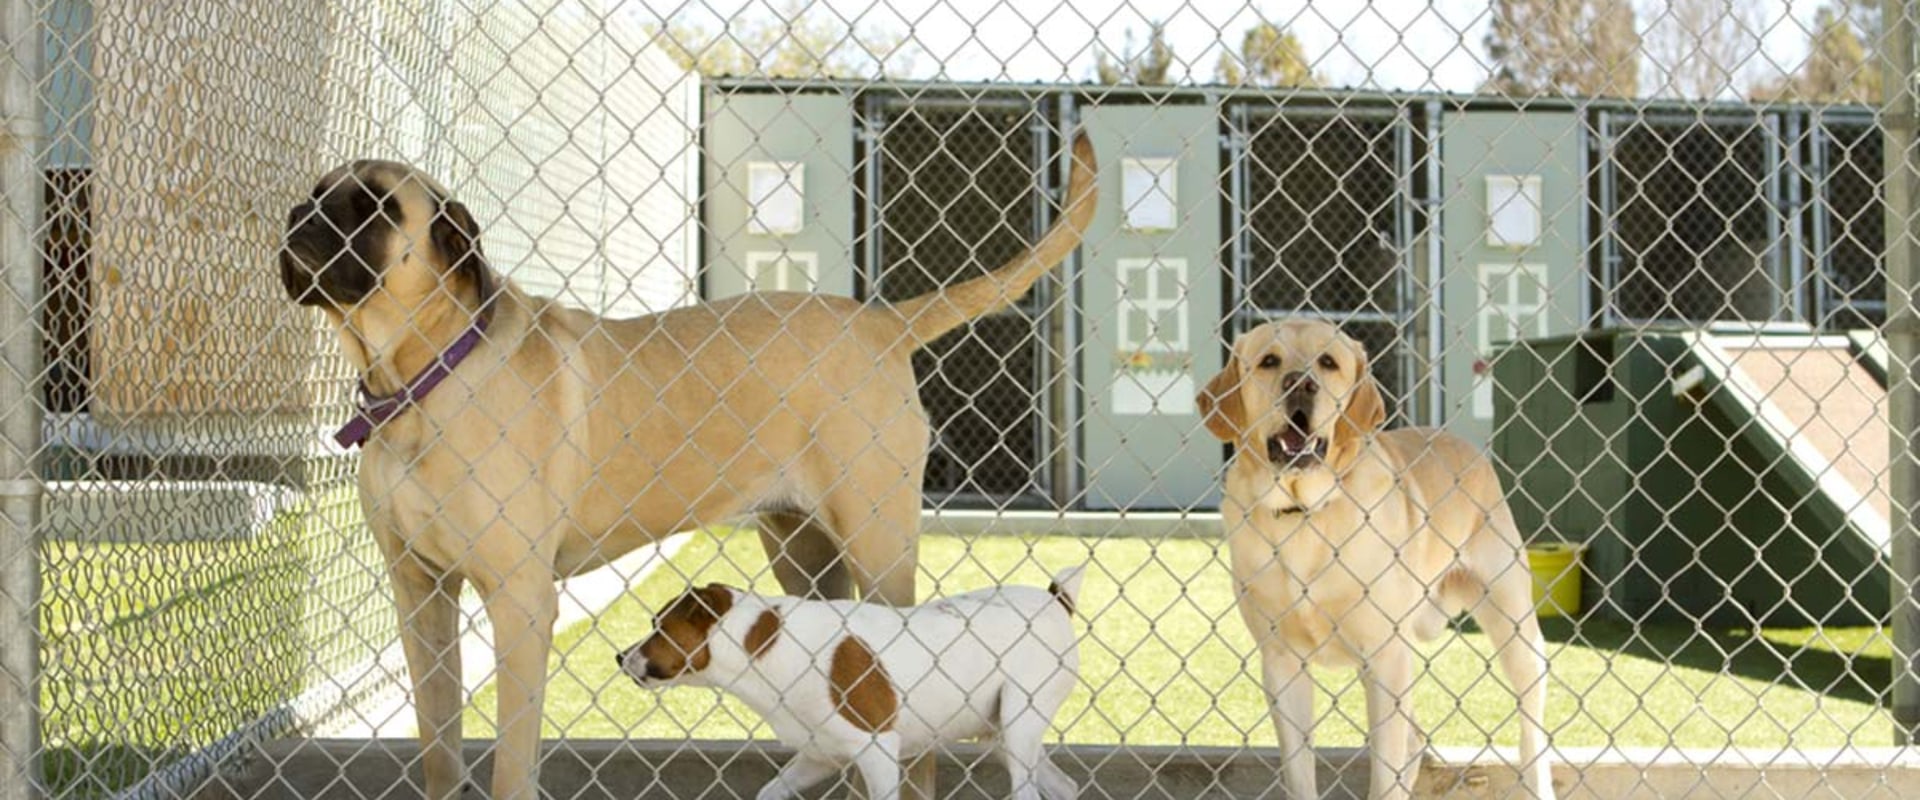 Are there any additional fees associated with using a dog kennel service?